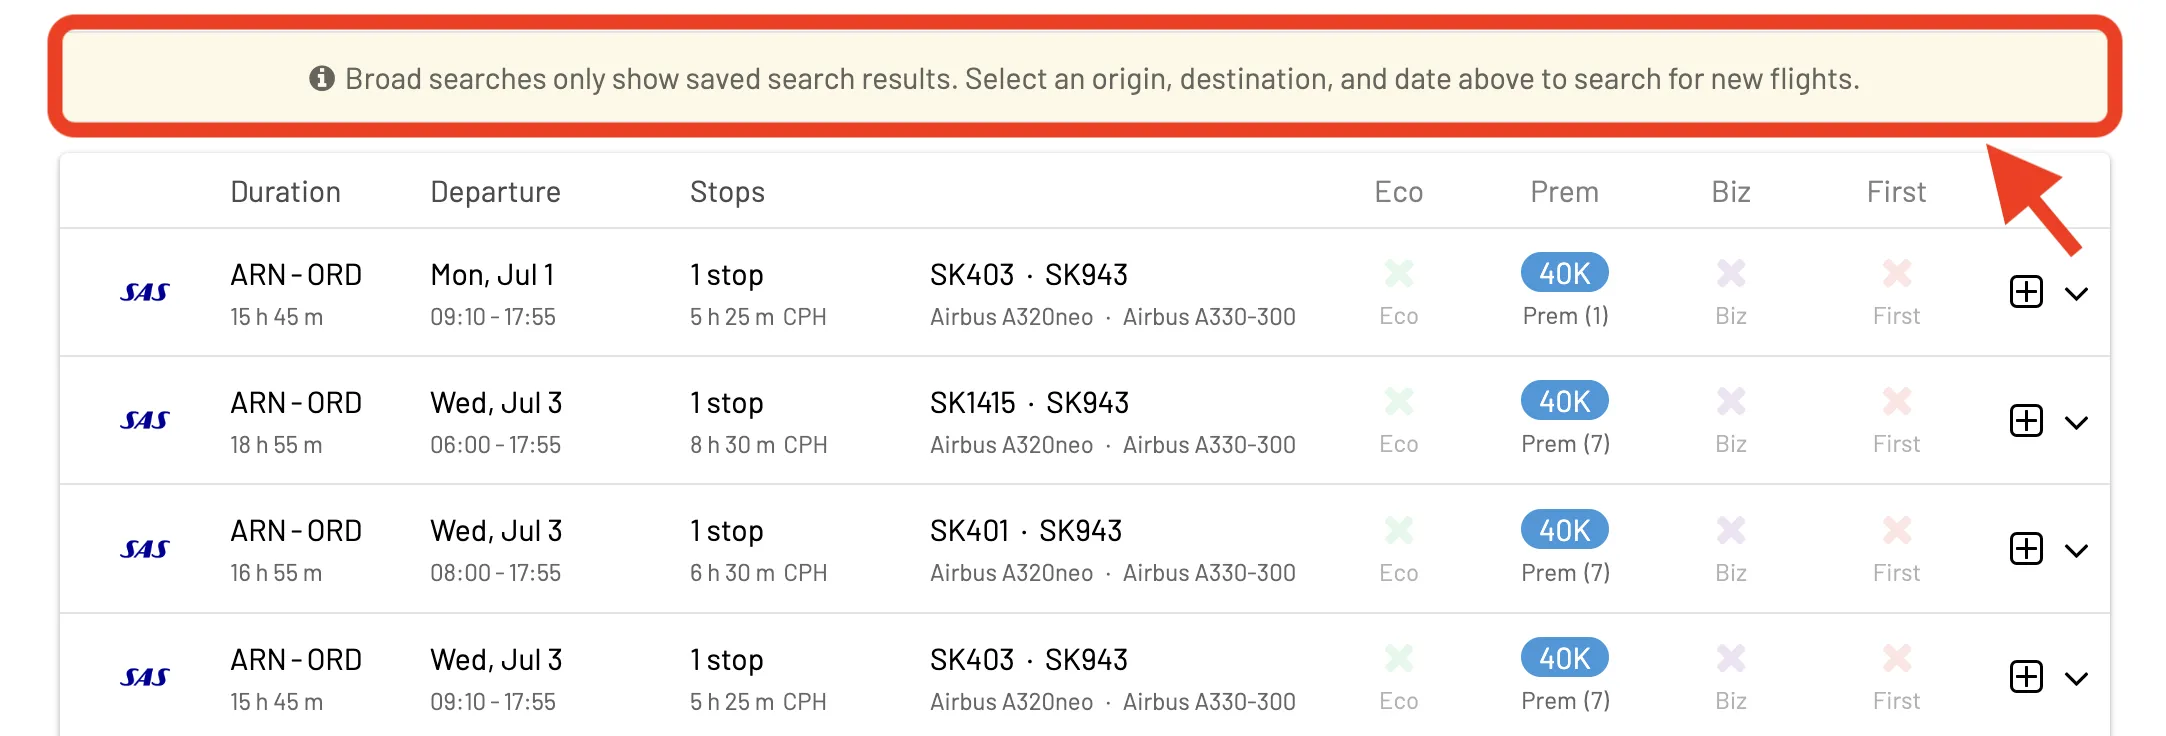 Broad award flight search using AwardFares, uses cached results.